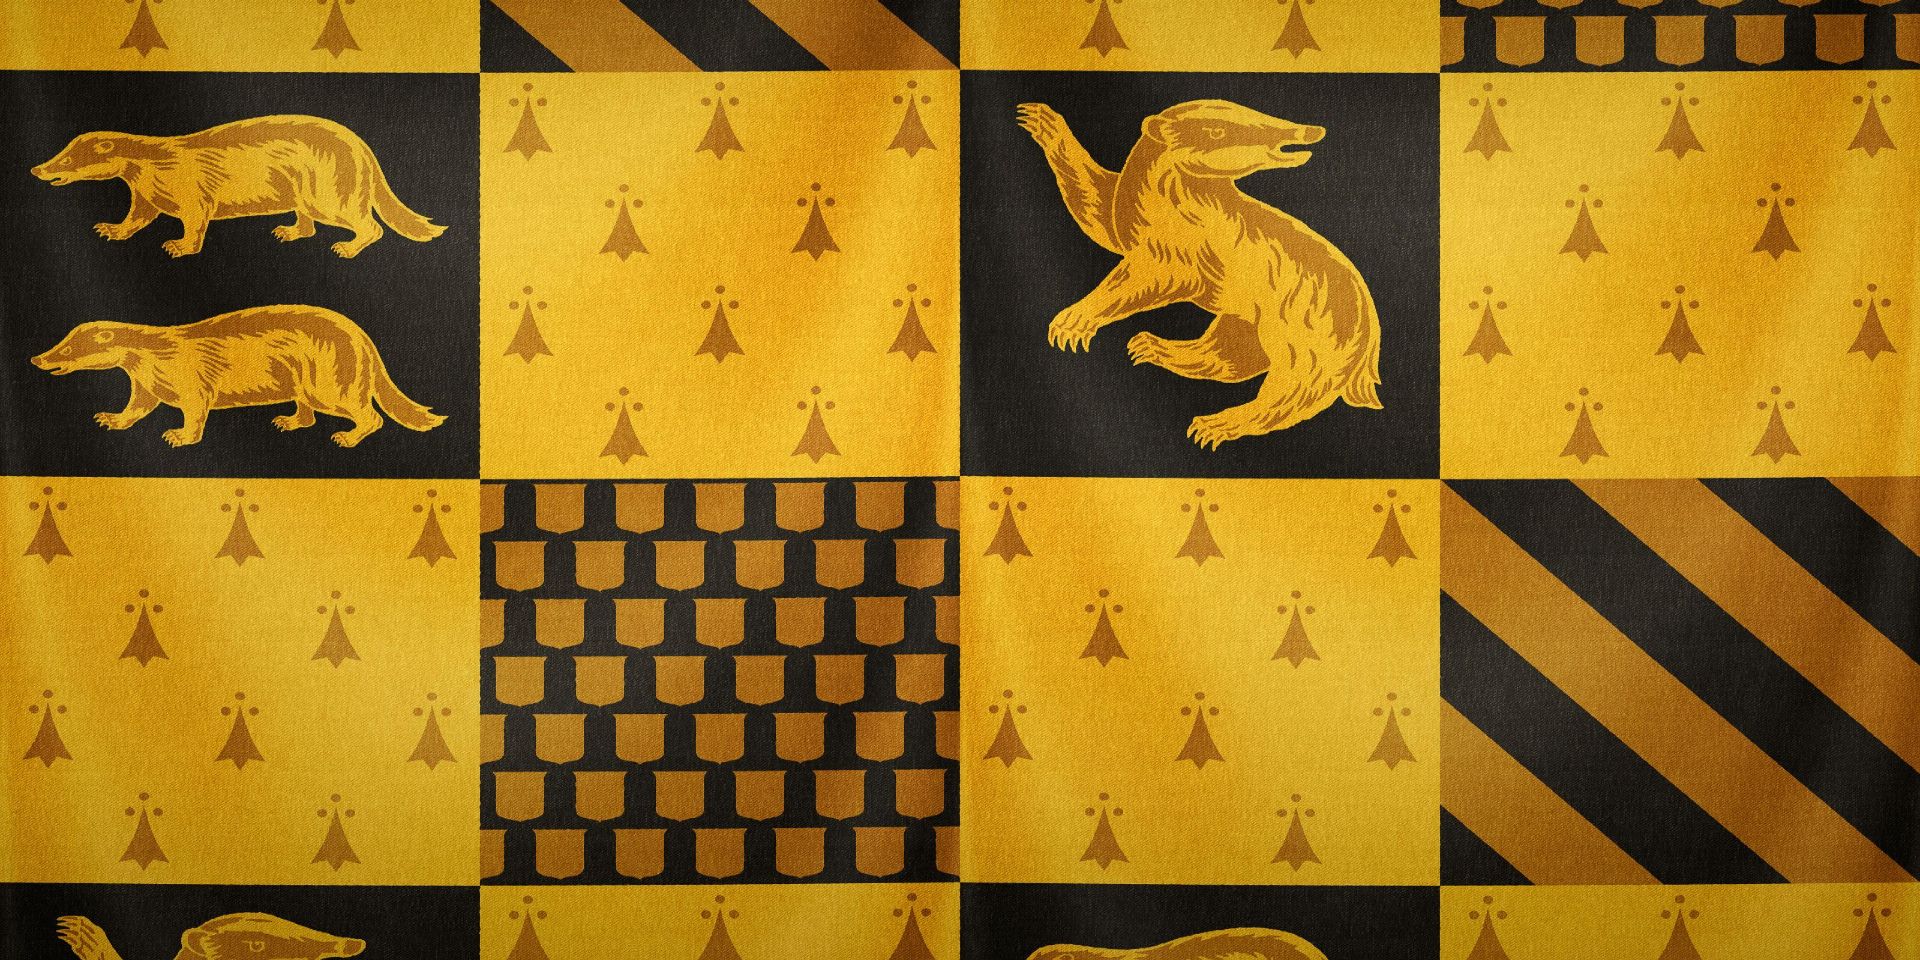 The flag of the Hufflepuff house in Harry Potter.